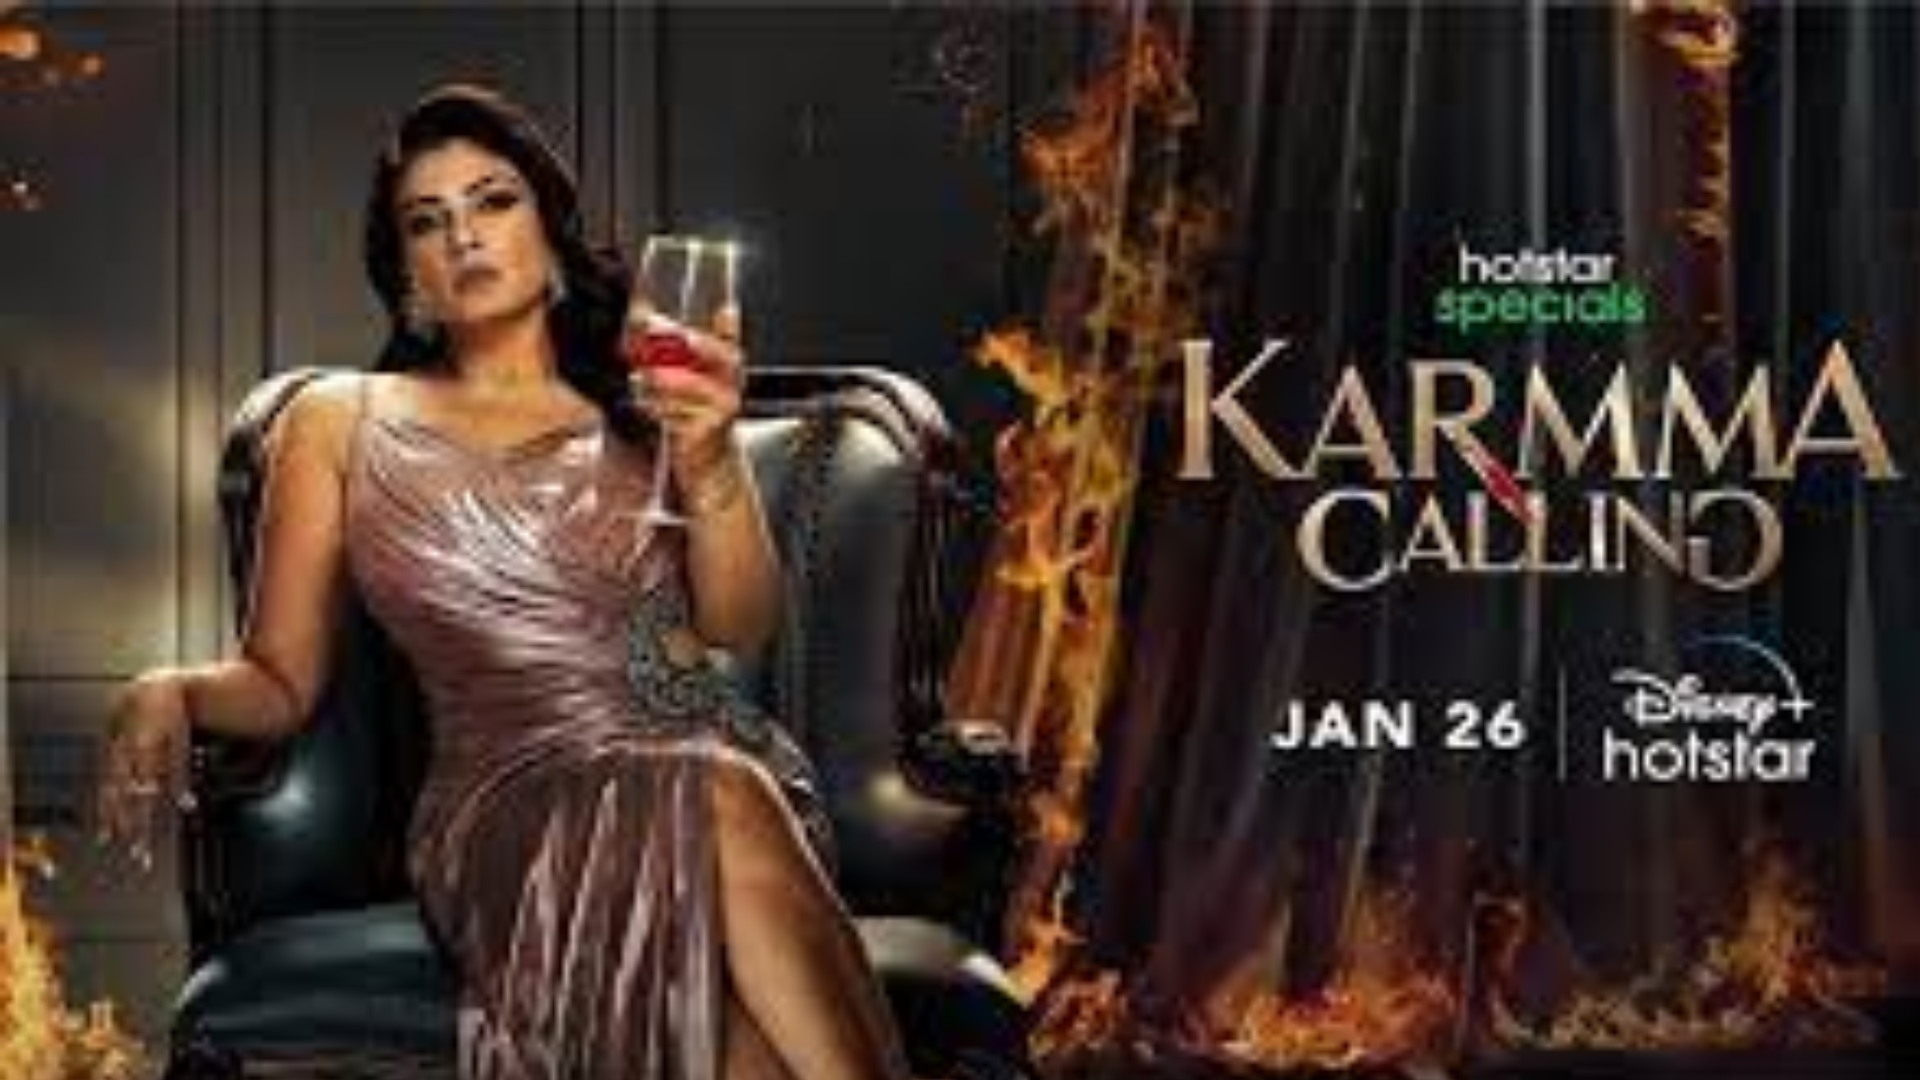 Karmma Calling: Raveena Tandon is the only highlight of this series